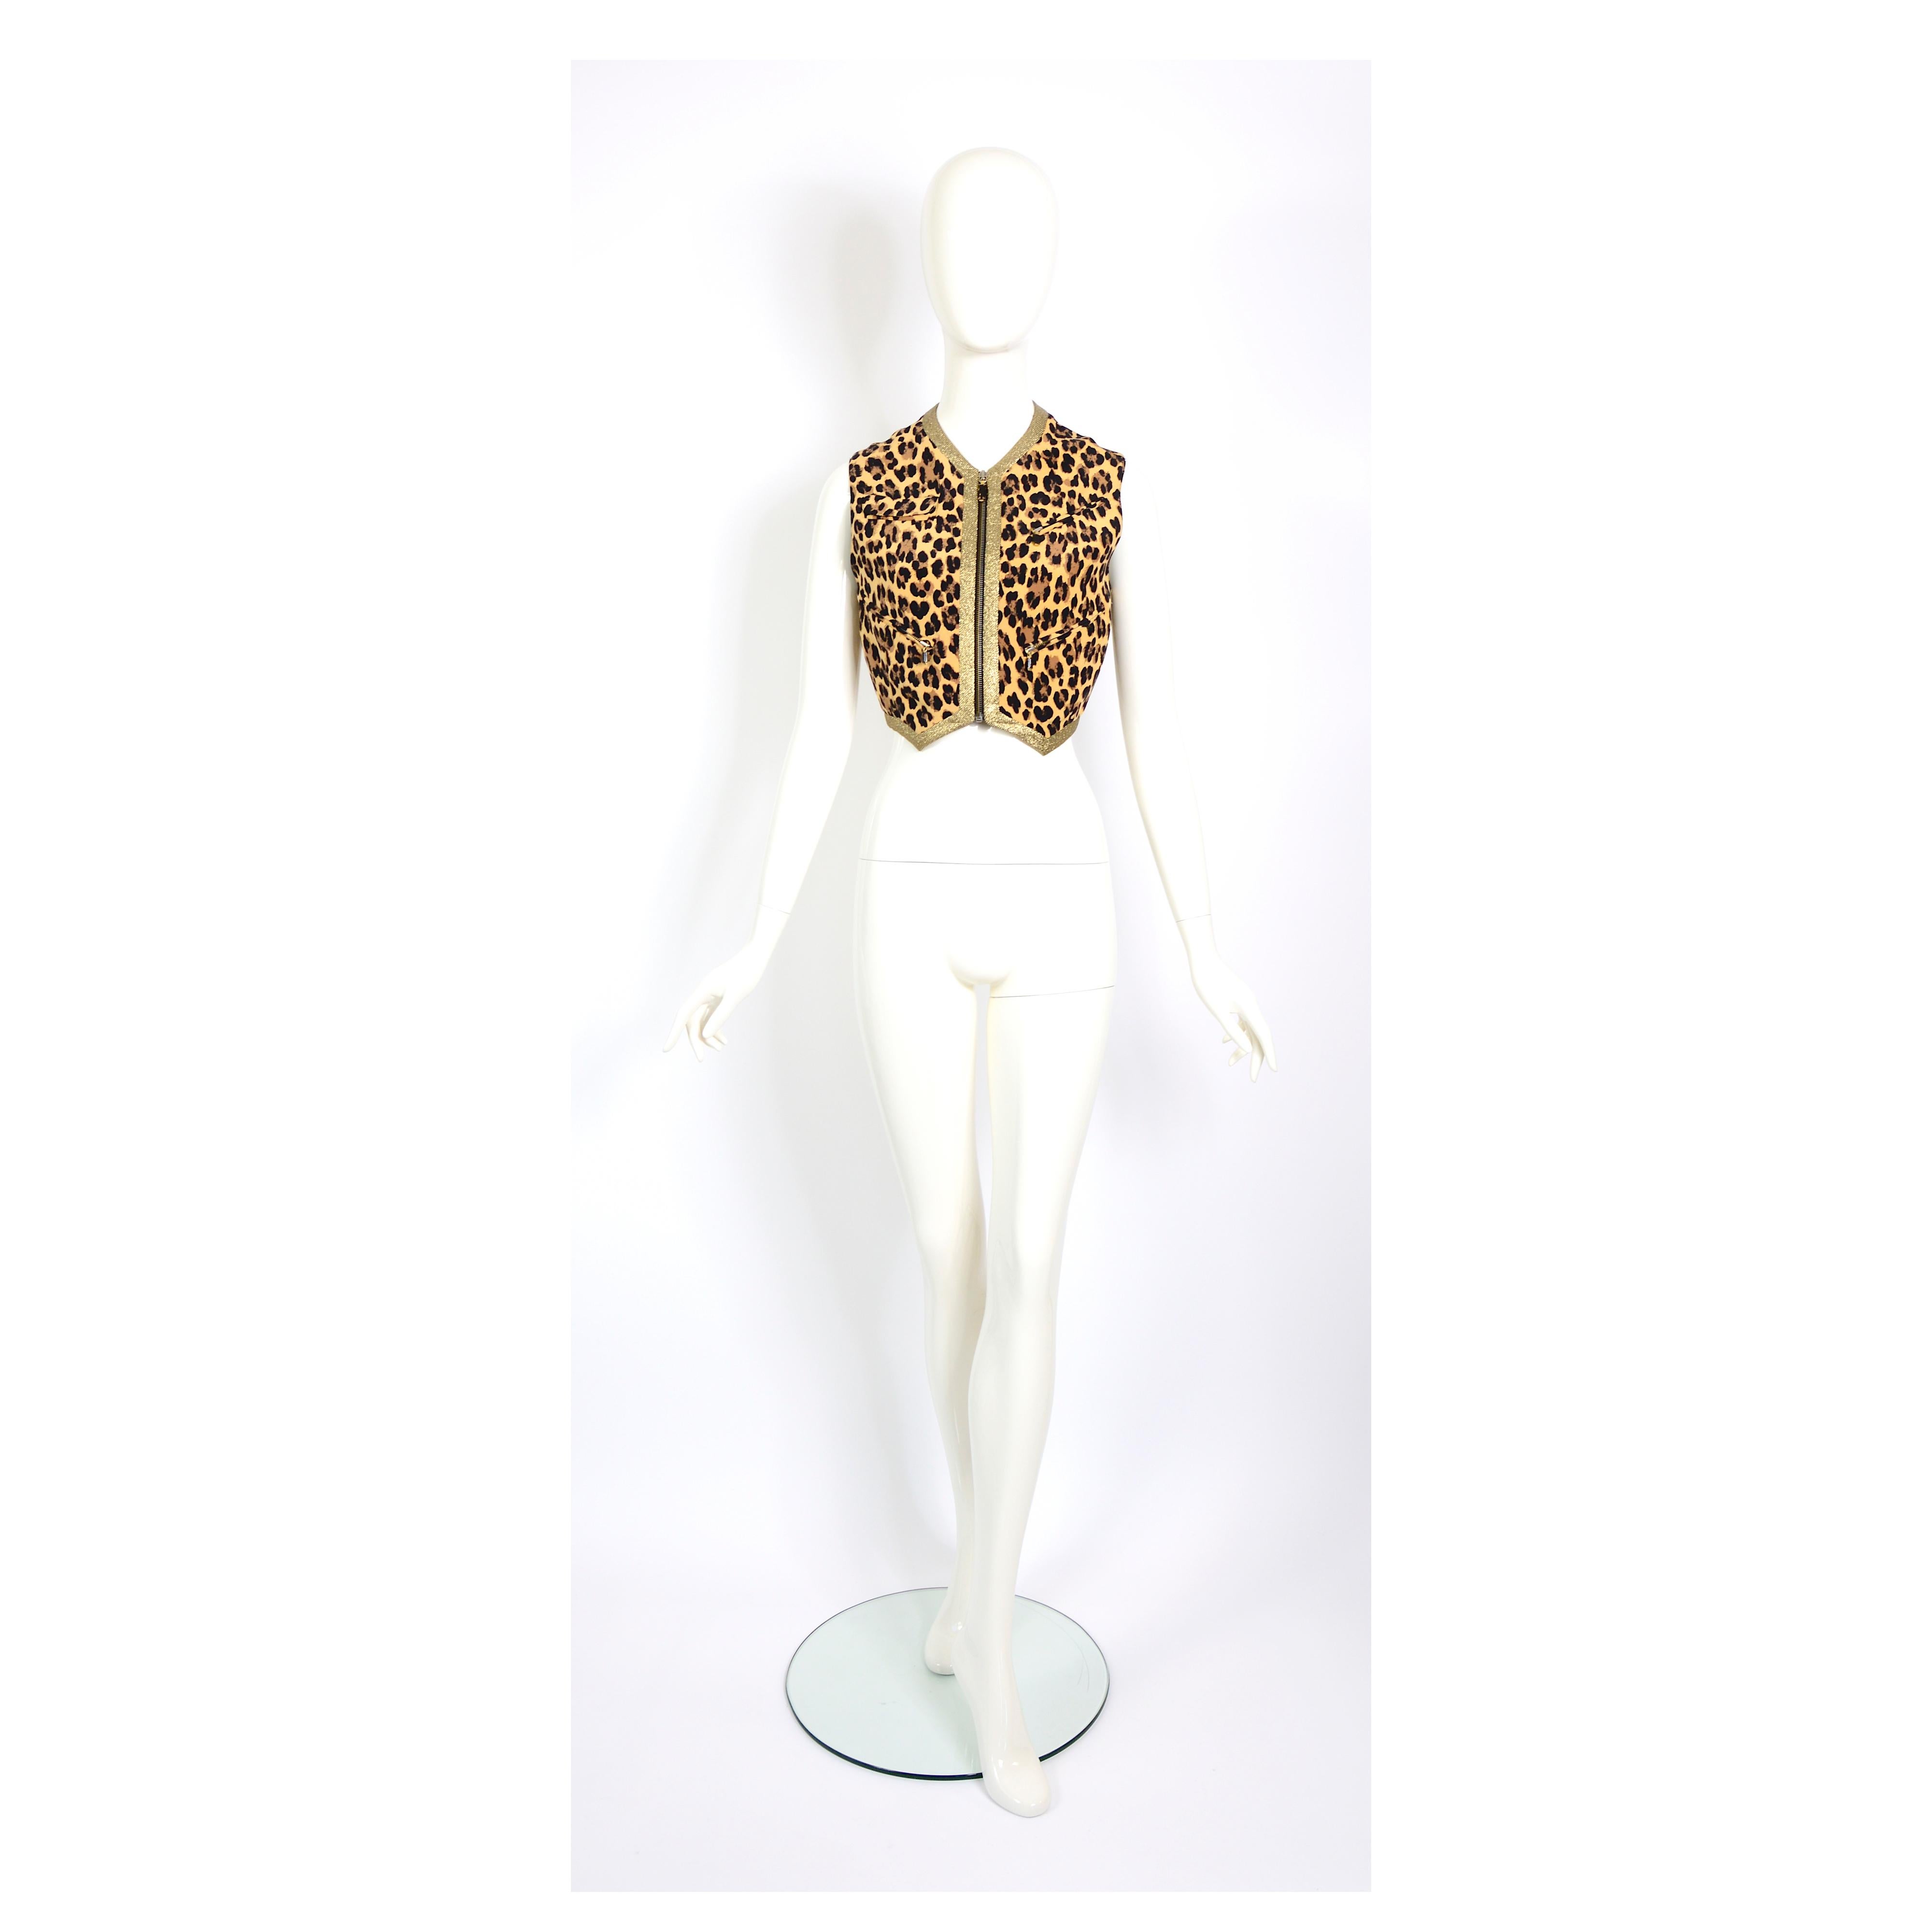 This Iconic SS 1992 GIANNI VERSACE COUTURE silk leopard print vest with gold lurex piping vintage collector's item and seen on Stephanie Seymour walking the show.

Label GIANNI VERSACE COUTURE, Italian size 38 or 4.
Measurements that are taken